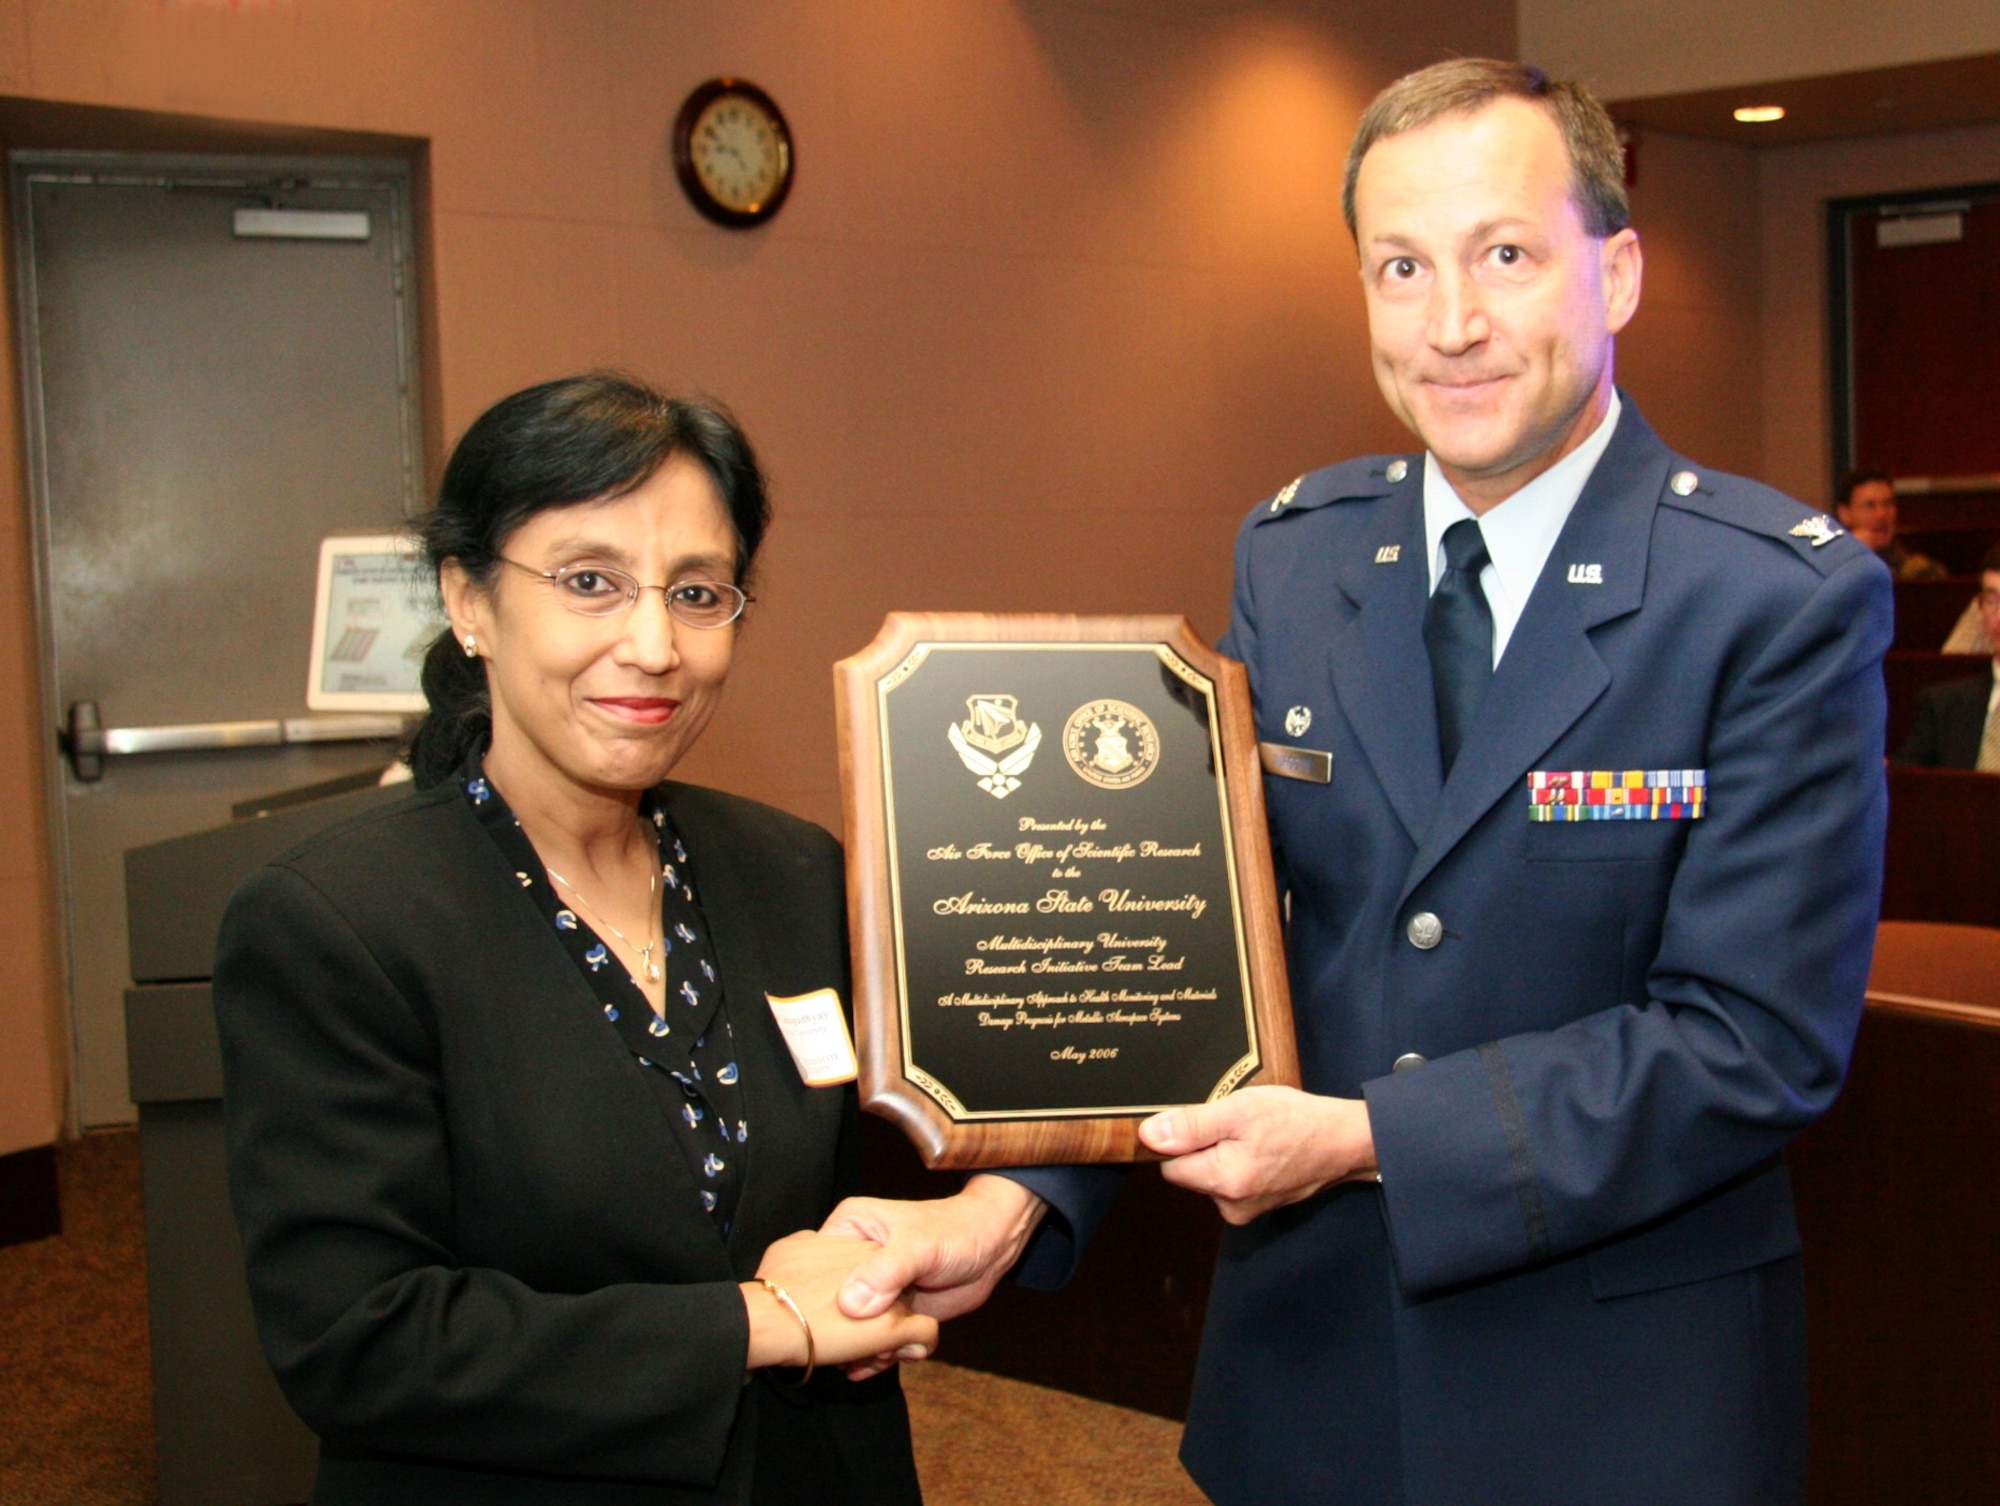 PHOENIX— Col. Jeff Turcotte, Deputy Director at the Air Force Office of Scientific Research, presents a plaque to Prof. Aditi Chattopadhyay, Principal Investigator of the aerospace research project at the Ira A. Fulton School of Engineering at Arizona State University, supported by an $8.6 million Department of Defense Multidisciplinary University Research Initiative program grant. (Arizona State University photo by Kenneth Sweat)

